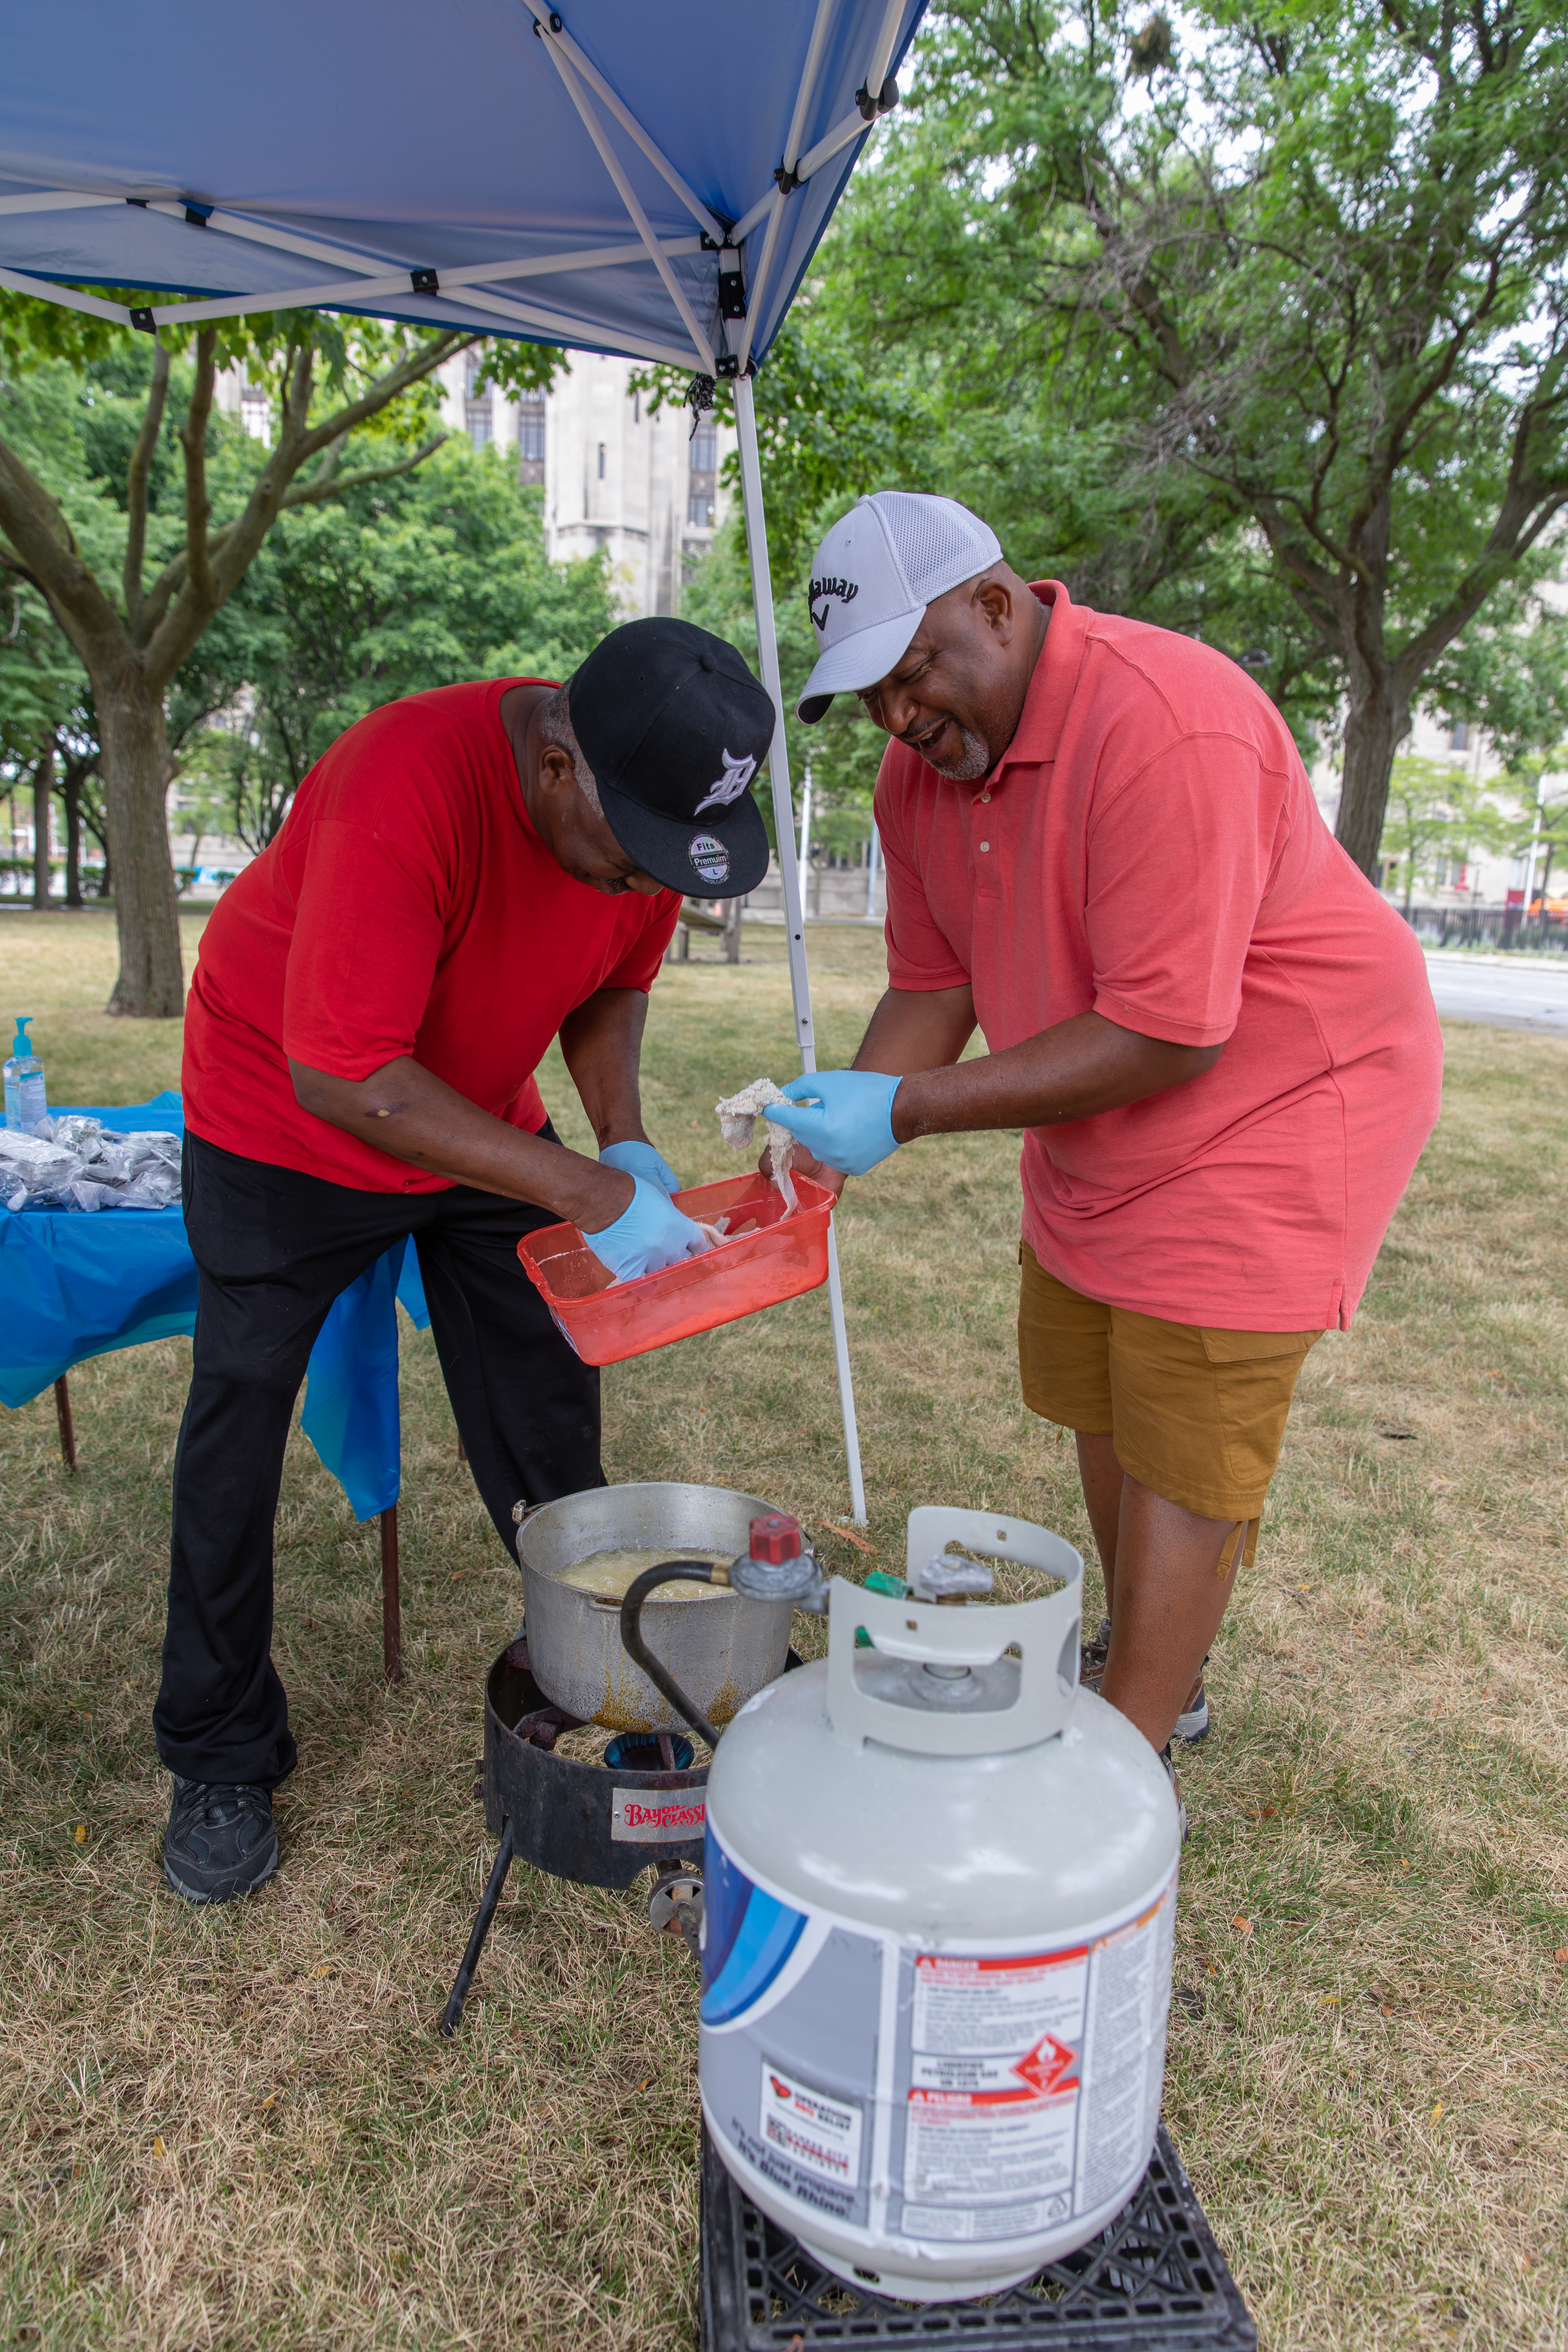 John Smith (right) helps prepare a meal in Detroit on July 21, 2018.